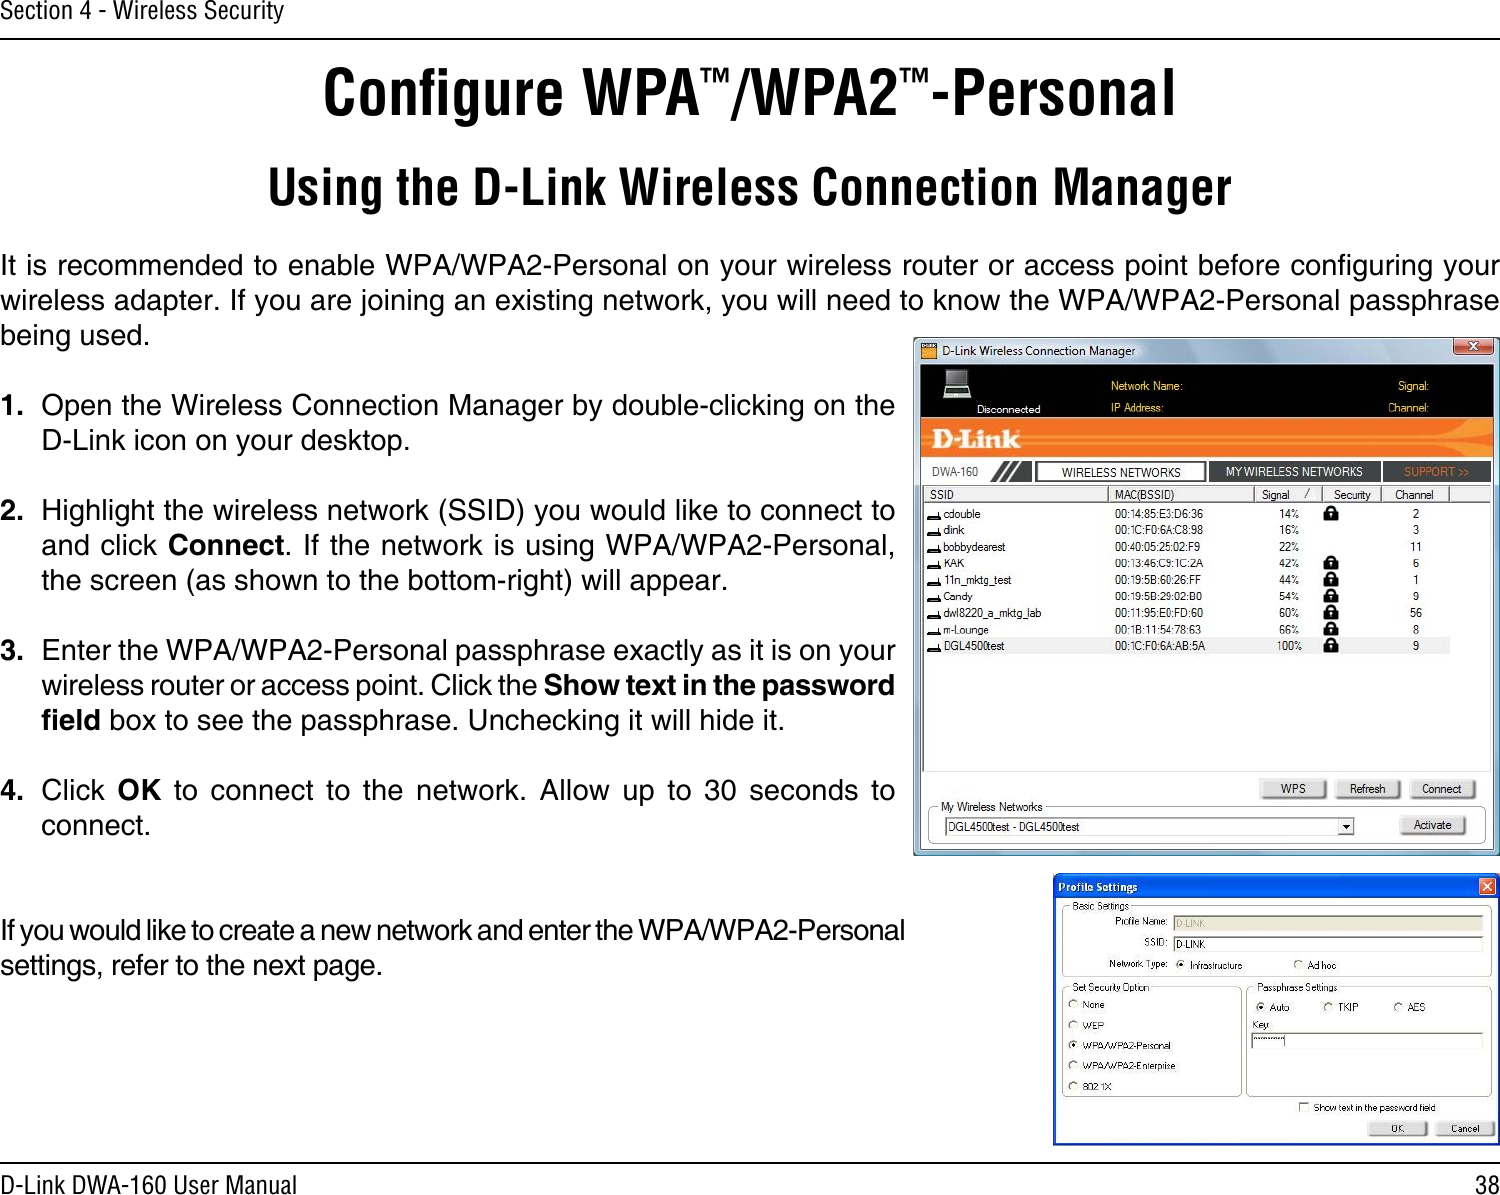 38D-Link DWA-160 User ManualSection 4 - Wireless SecurityConﬁgure WPA™/WPA2™-PersonalUsing the D-Link Wireless Connection ManagerIt is recommended to enable WPA/WPA2-Personal on your wireless router or access point before conguring your wireless adapter. If you are joining an existing network, you will need to know the WPA/WPA2-Personal passphrase being used.1.  Open the Wireless Connection Manager by double-clicking on the D-Link icon on your desktop. 2.  Highlight the wireless network (SSID) you would like to connect to and click Connect. If the network is using WPA/WPA2-Personal, the screen (as shown to the bottom-right) will appear. 3.  Enter the WPA/WPA2-Personal passphrase exactly as it is on your wireless router or access point. Click the Show text in the password eld box to see the passphrase. Unchecking it will hide it.4.  Click  OK  to  connect  to  the  network.  Allow  up  to  30  seconds  to connect.If you would like to create a new network and enter the WPA/WPA2-Personal settings, refer to the next page.